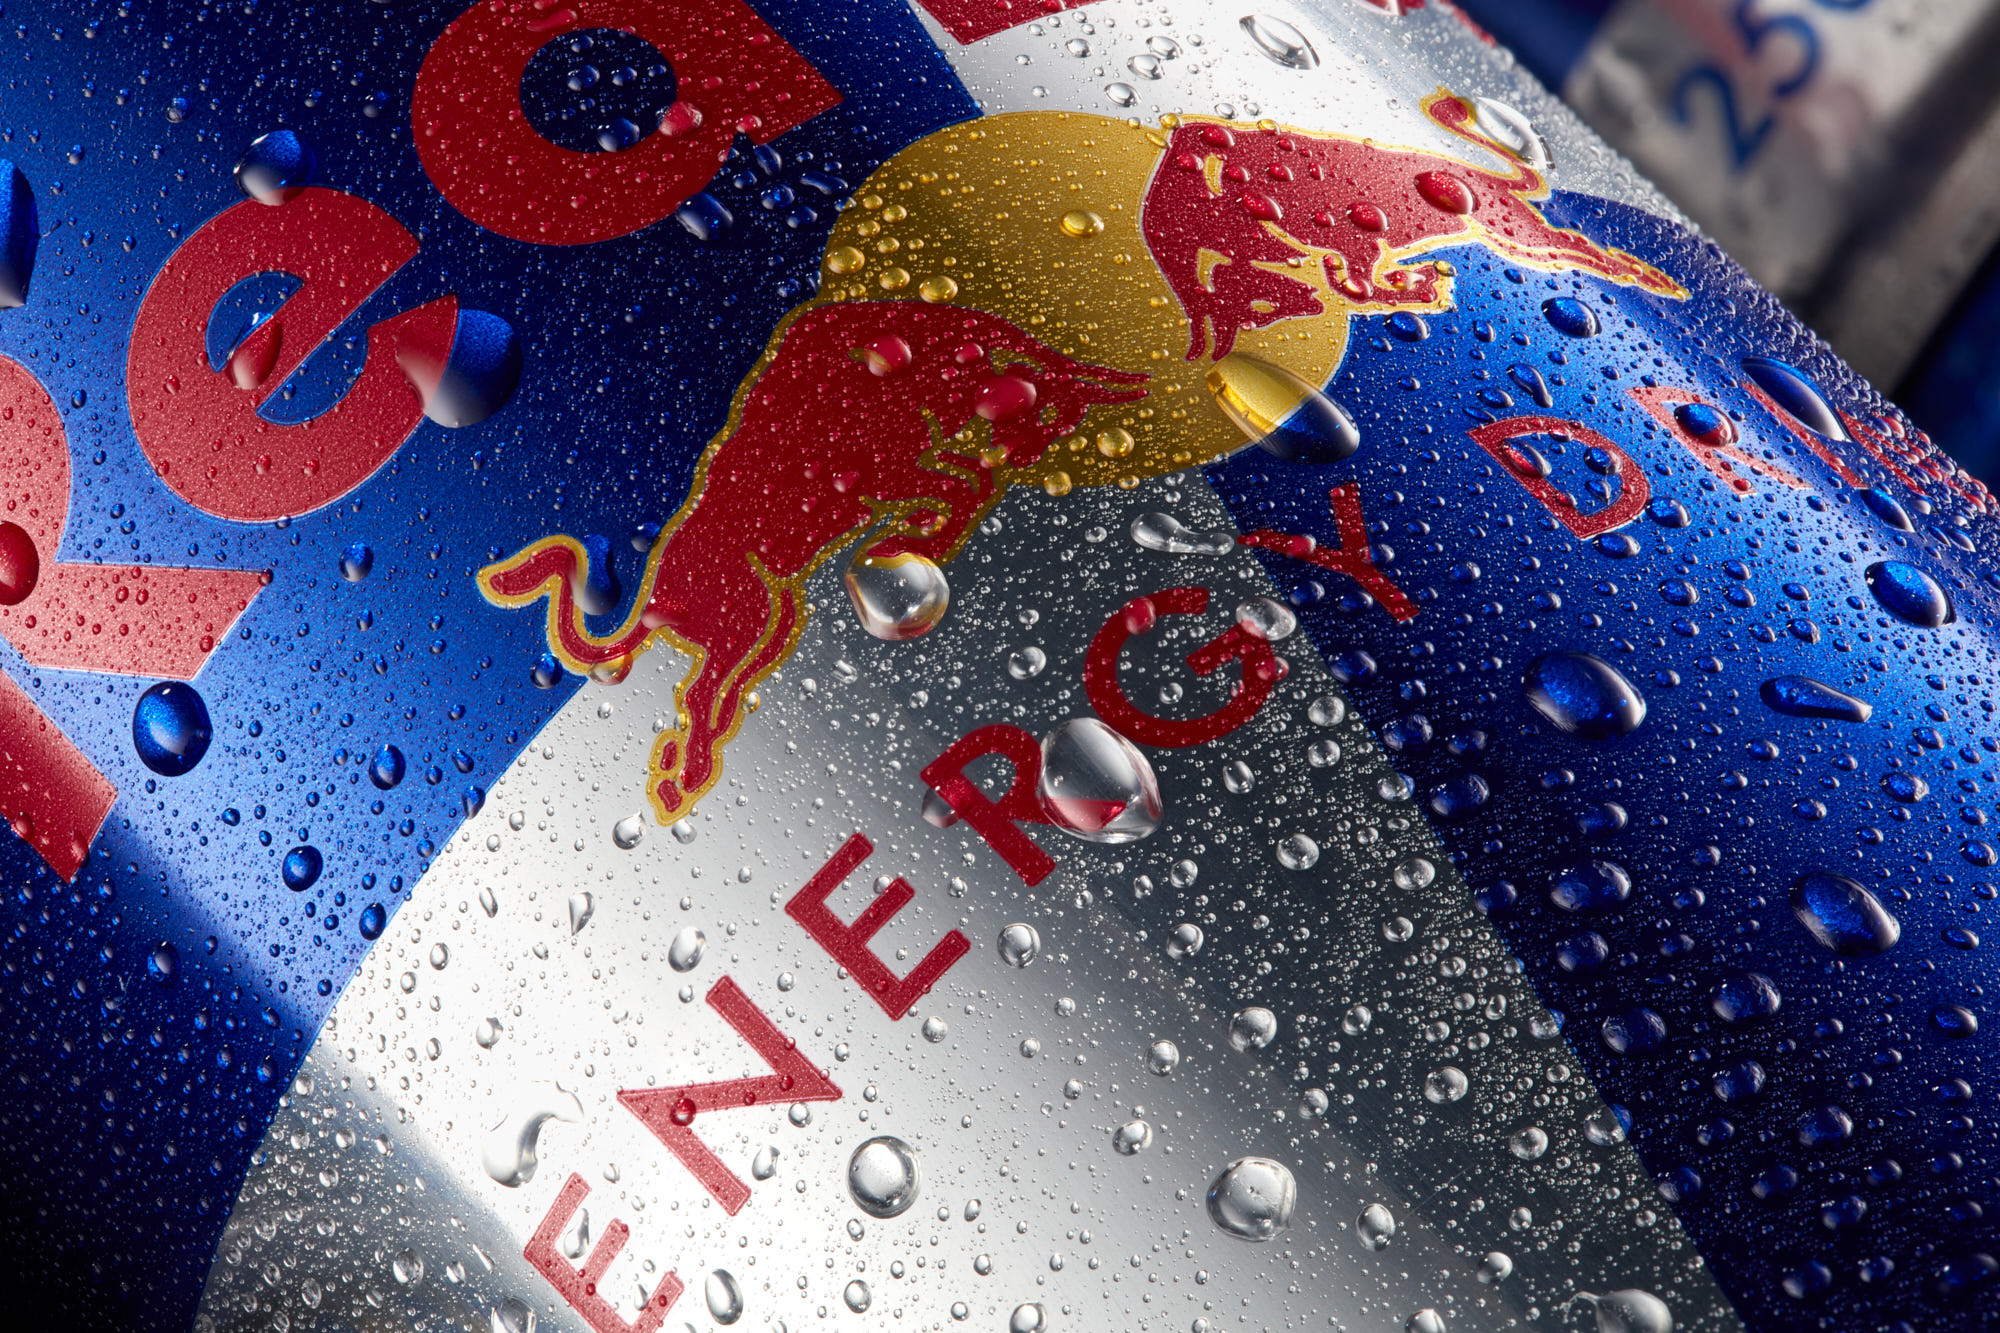 Red Bull can macro product photo with condensation